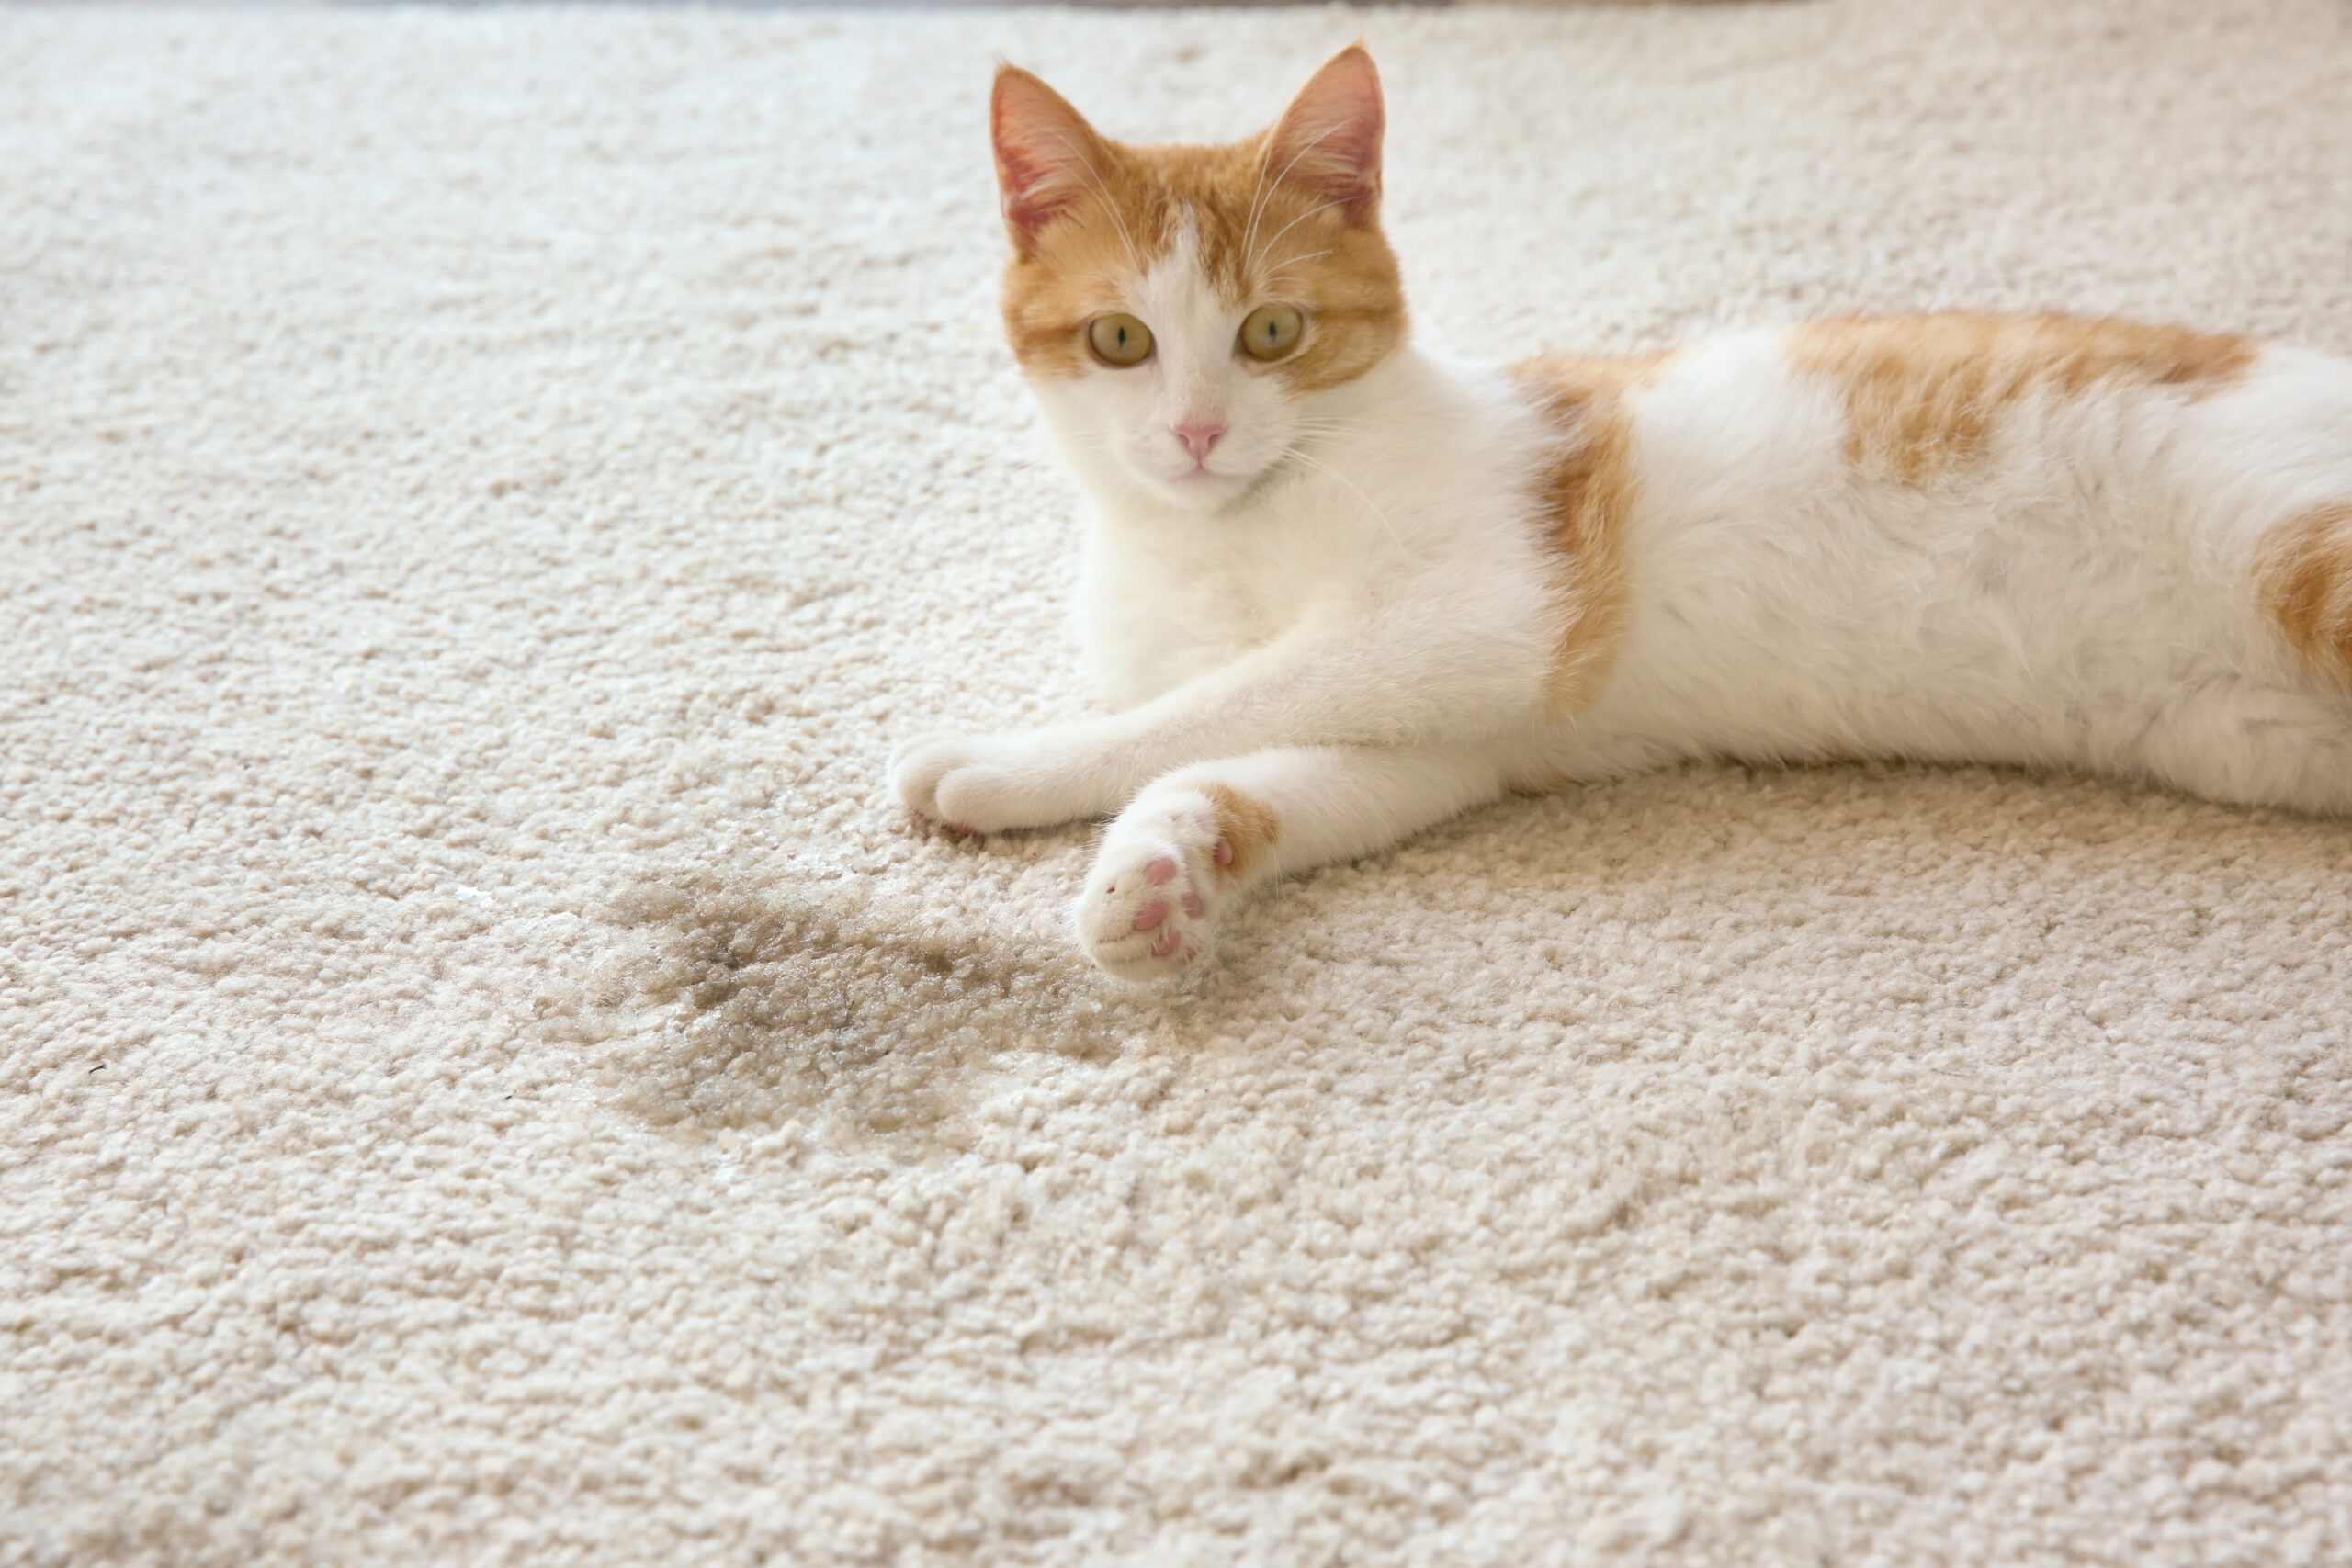 Carpet Cleaning Cat Urine: a cat in a carpet, freshly cleaned.